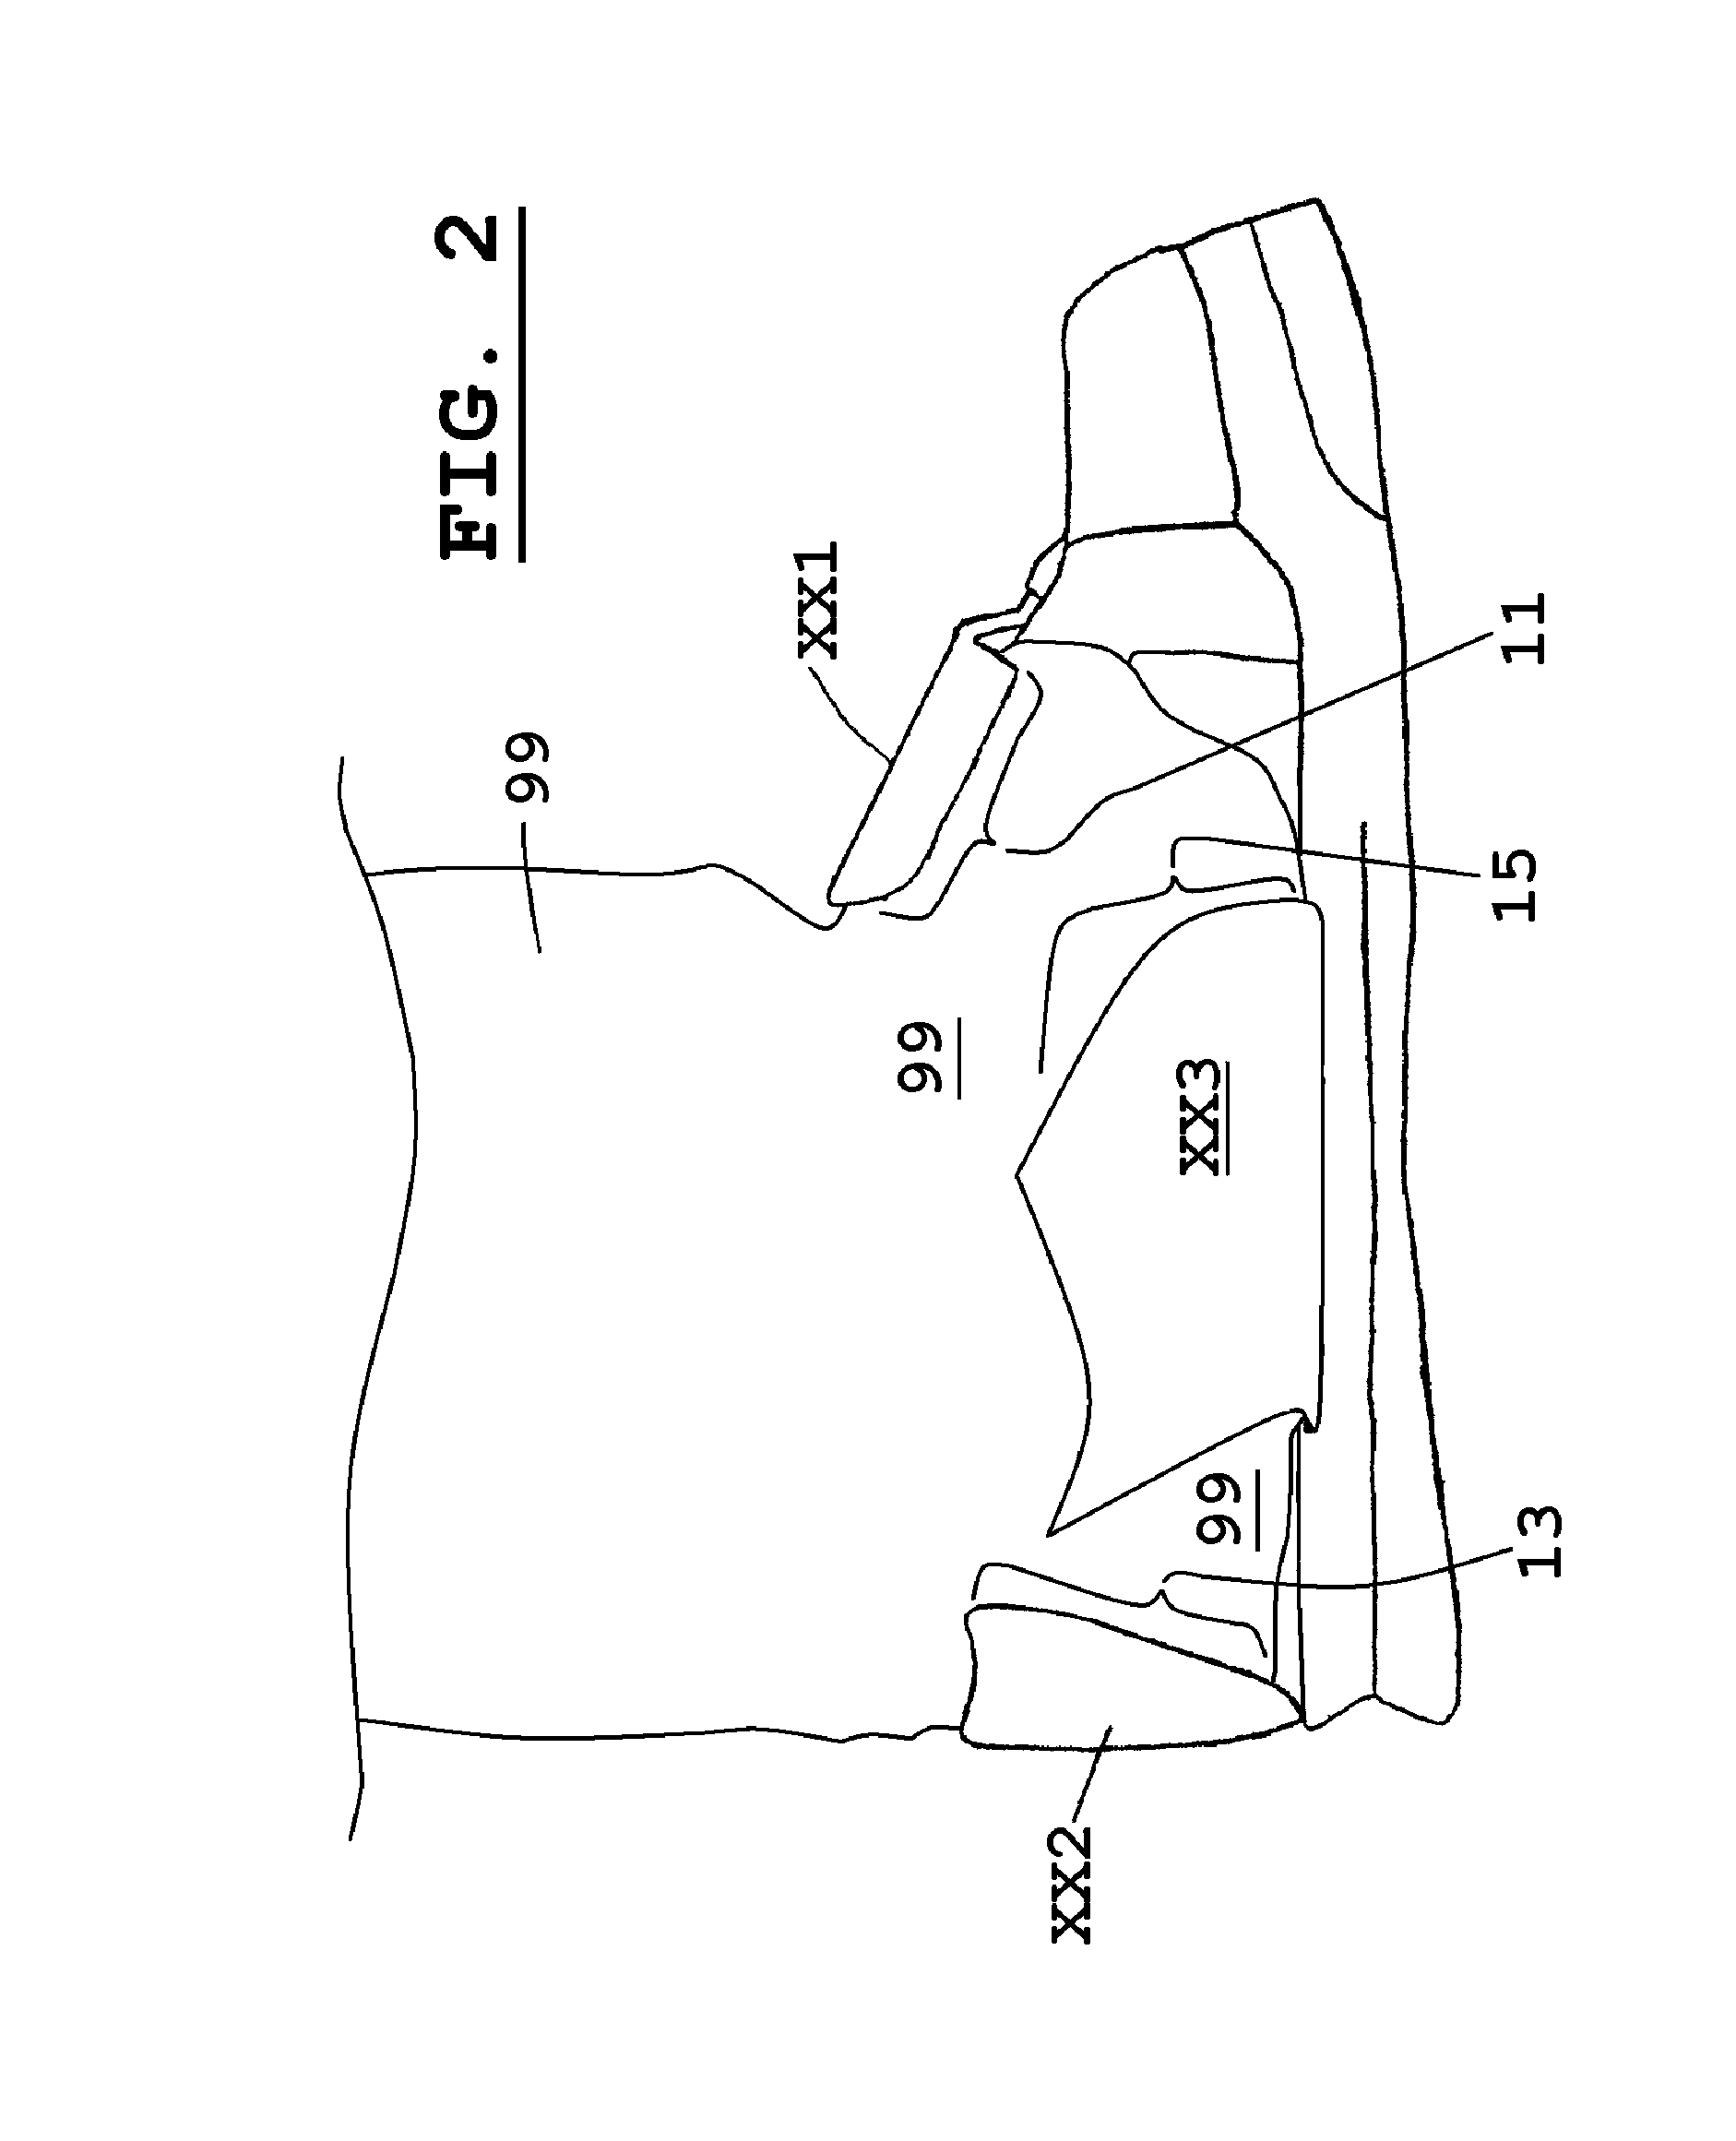 Pant-leg-covers for modified footwear, conventional footwear, and other foot-receiving apparatuses